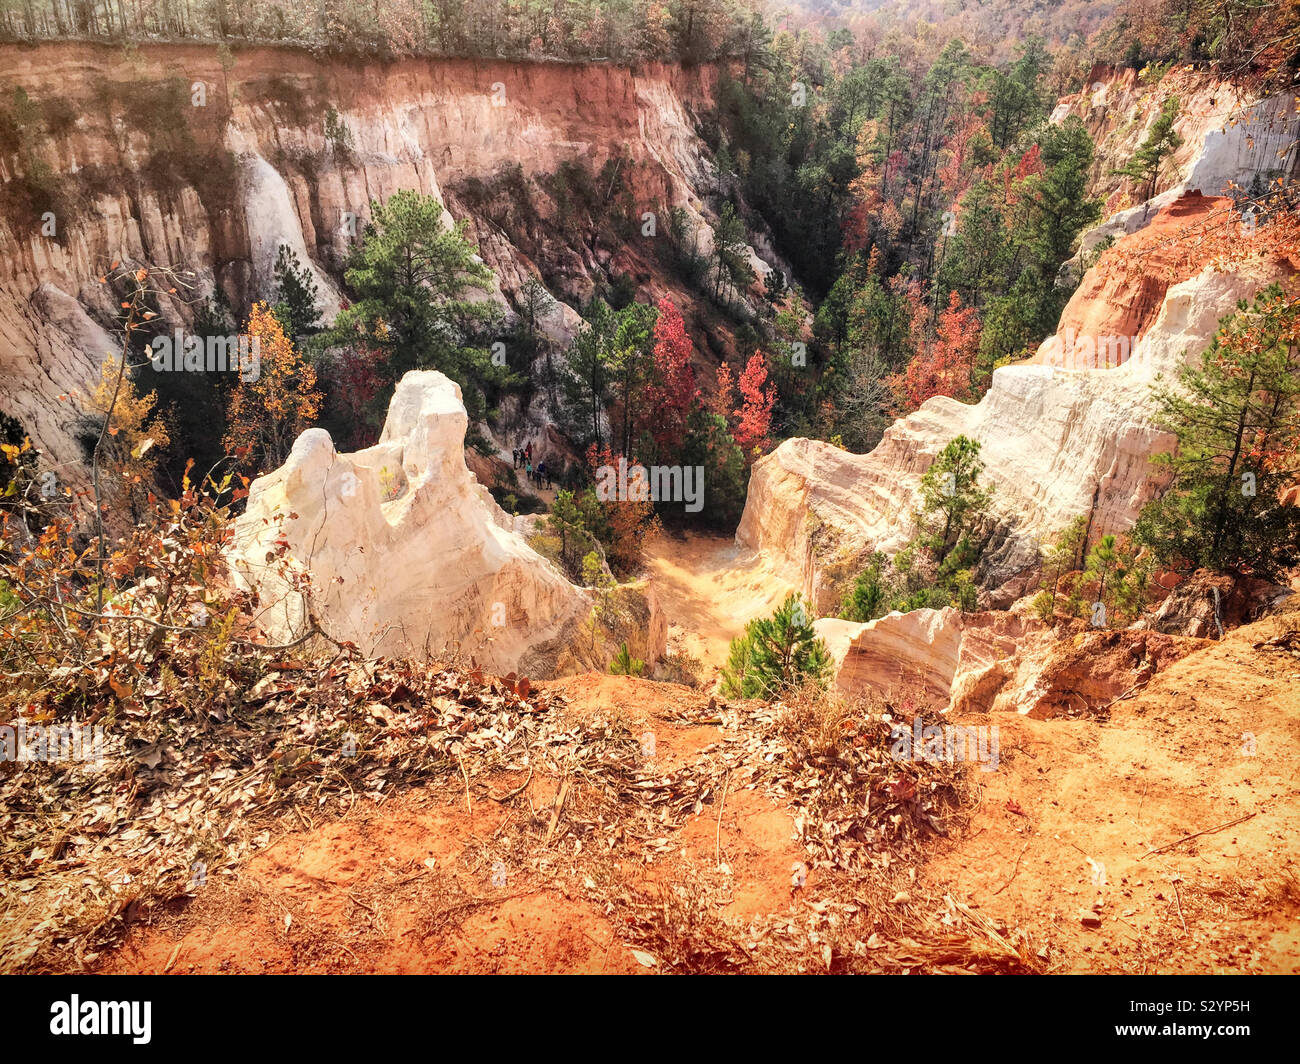 Providence Canyon in Lumpkin Georgia USA is also known as the Little Grand Canyon. It is one of the seven natural wonders of Georgia. Stock Photo